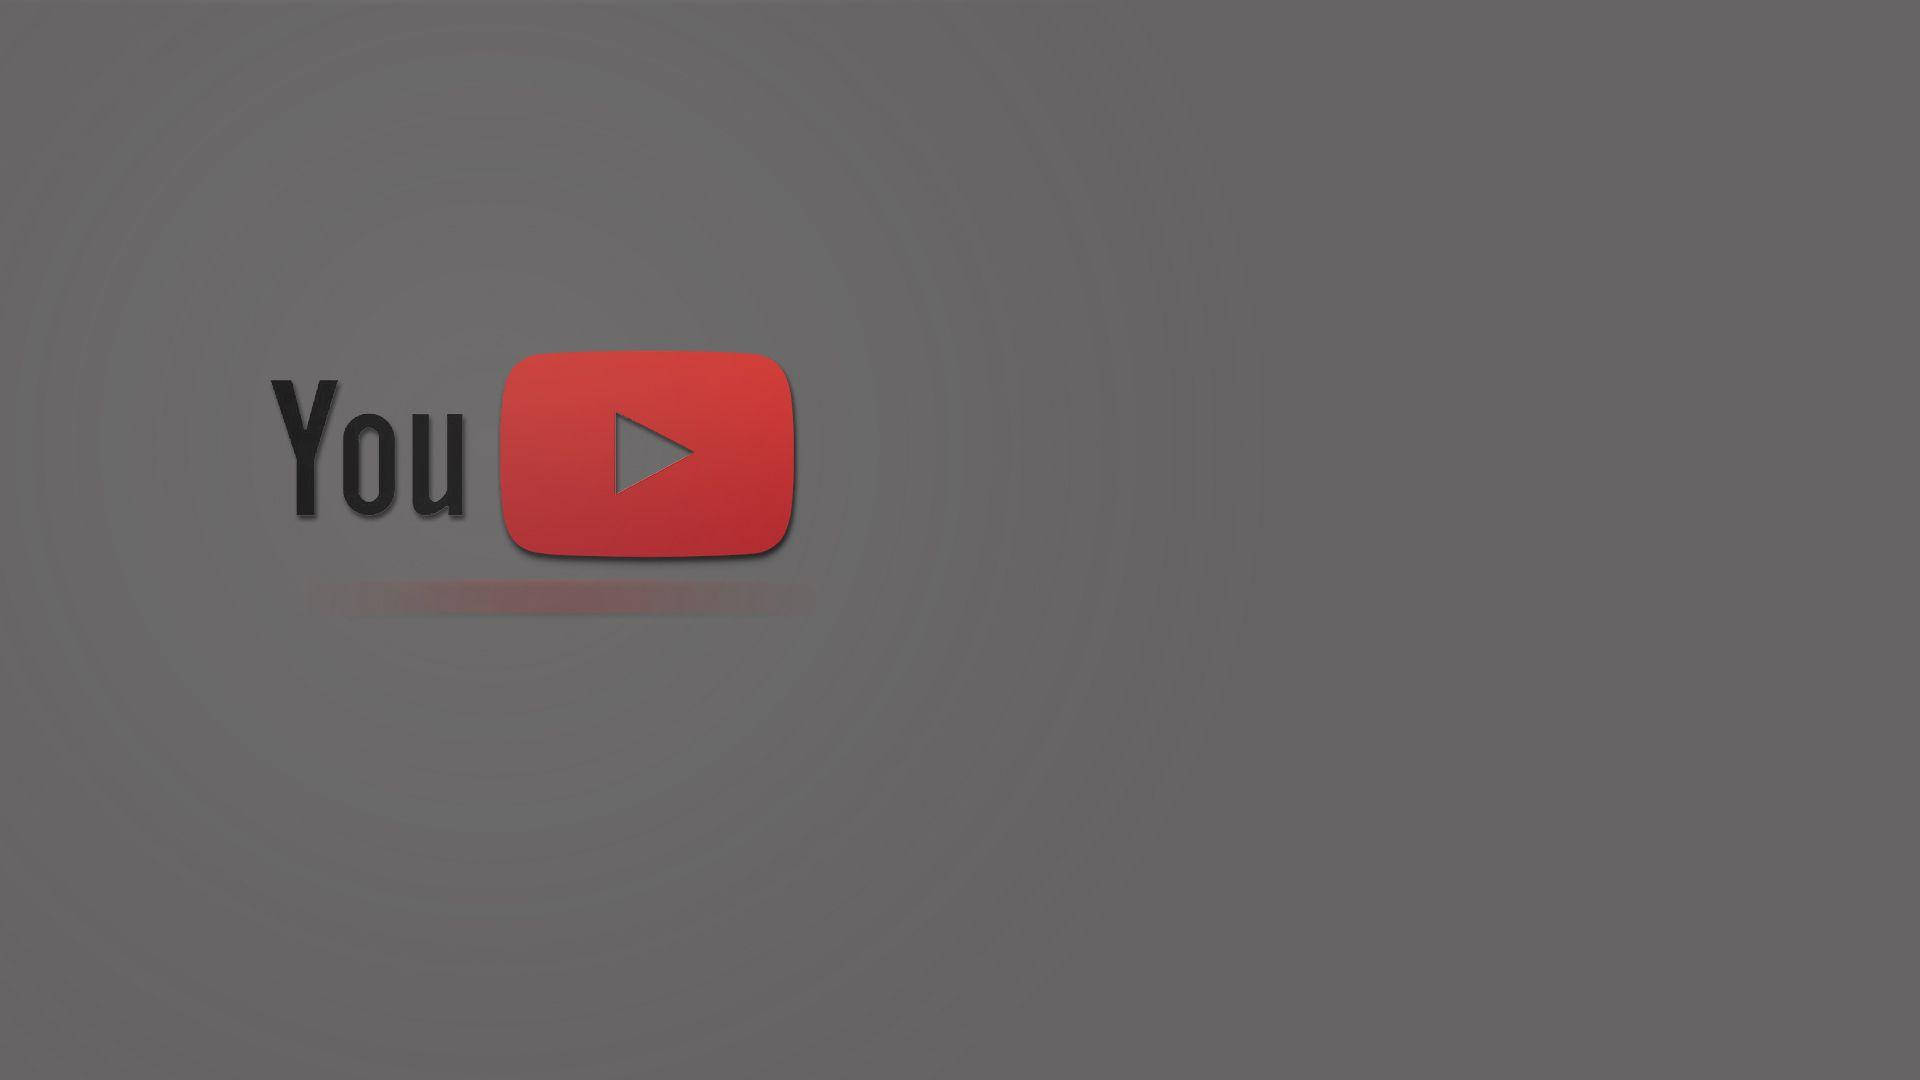 Aesthetic Youtube Red Play Button Logo Background